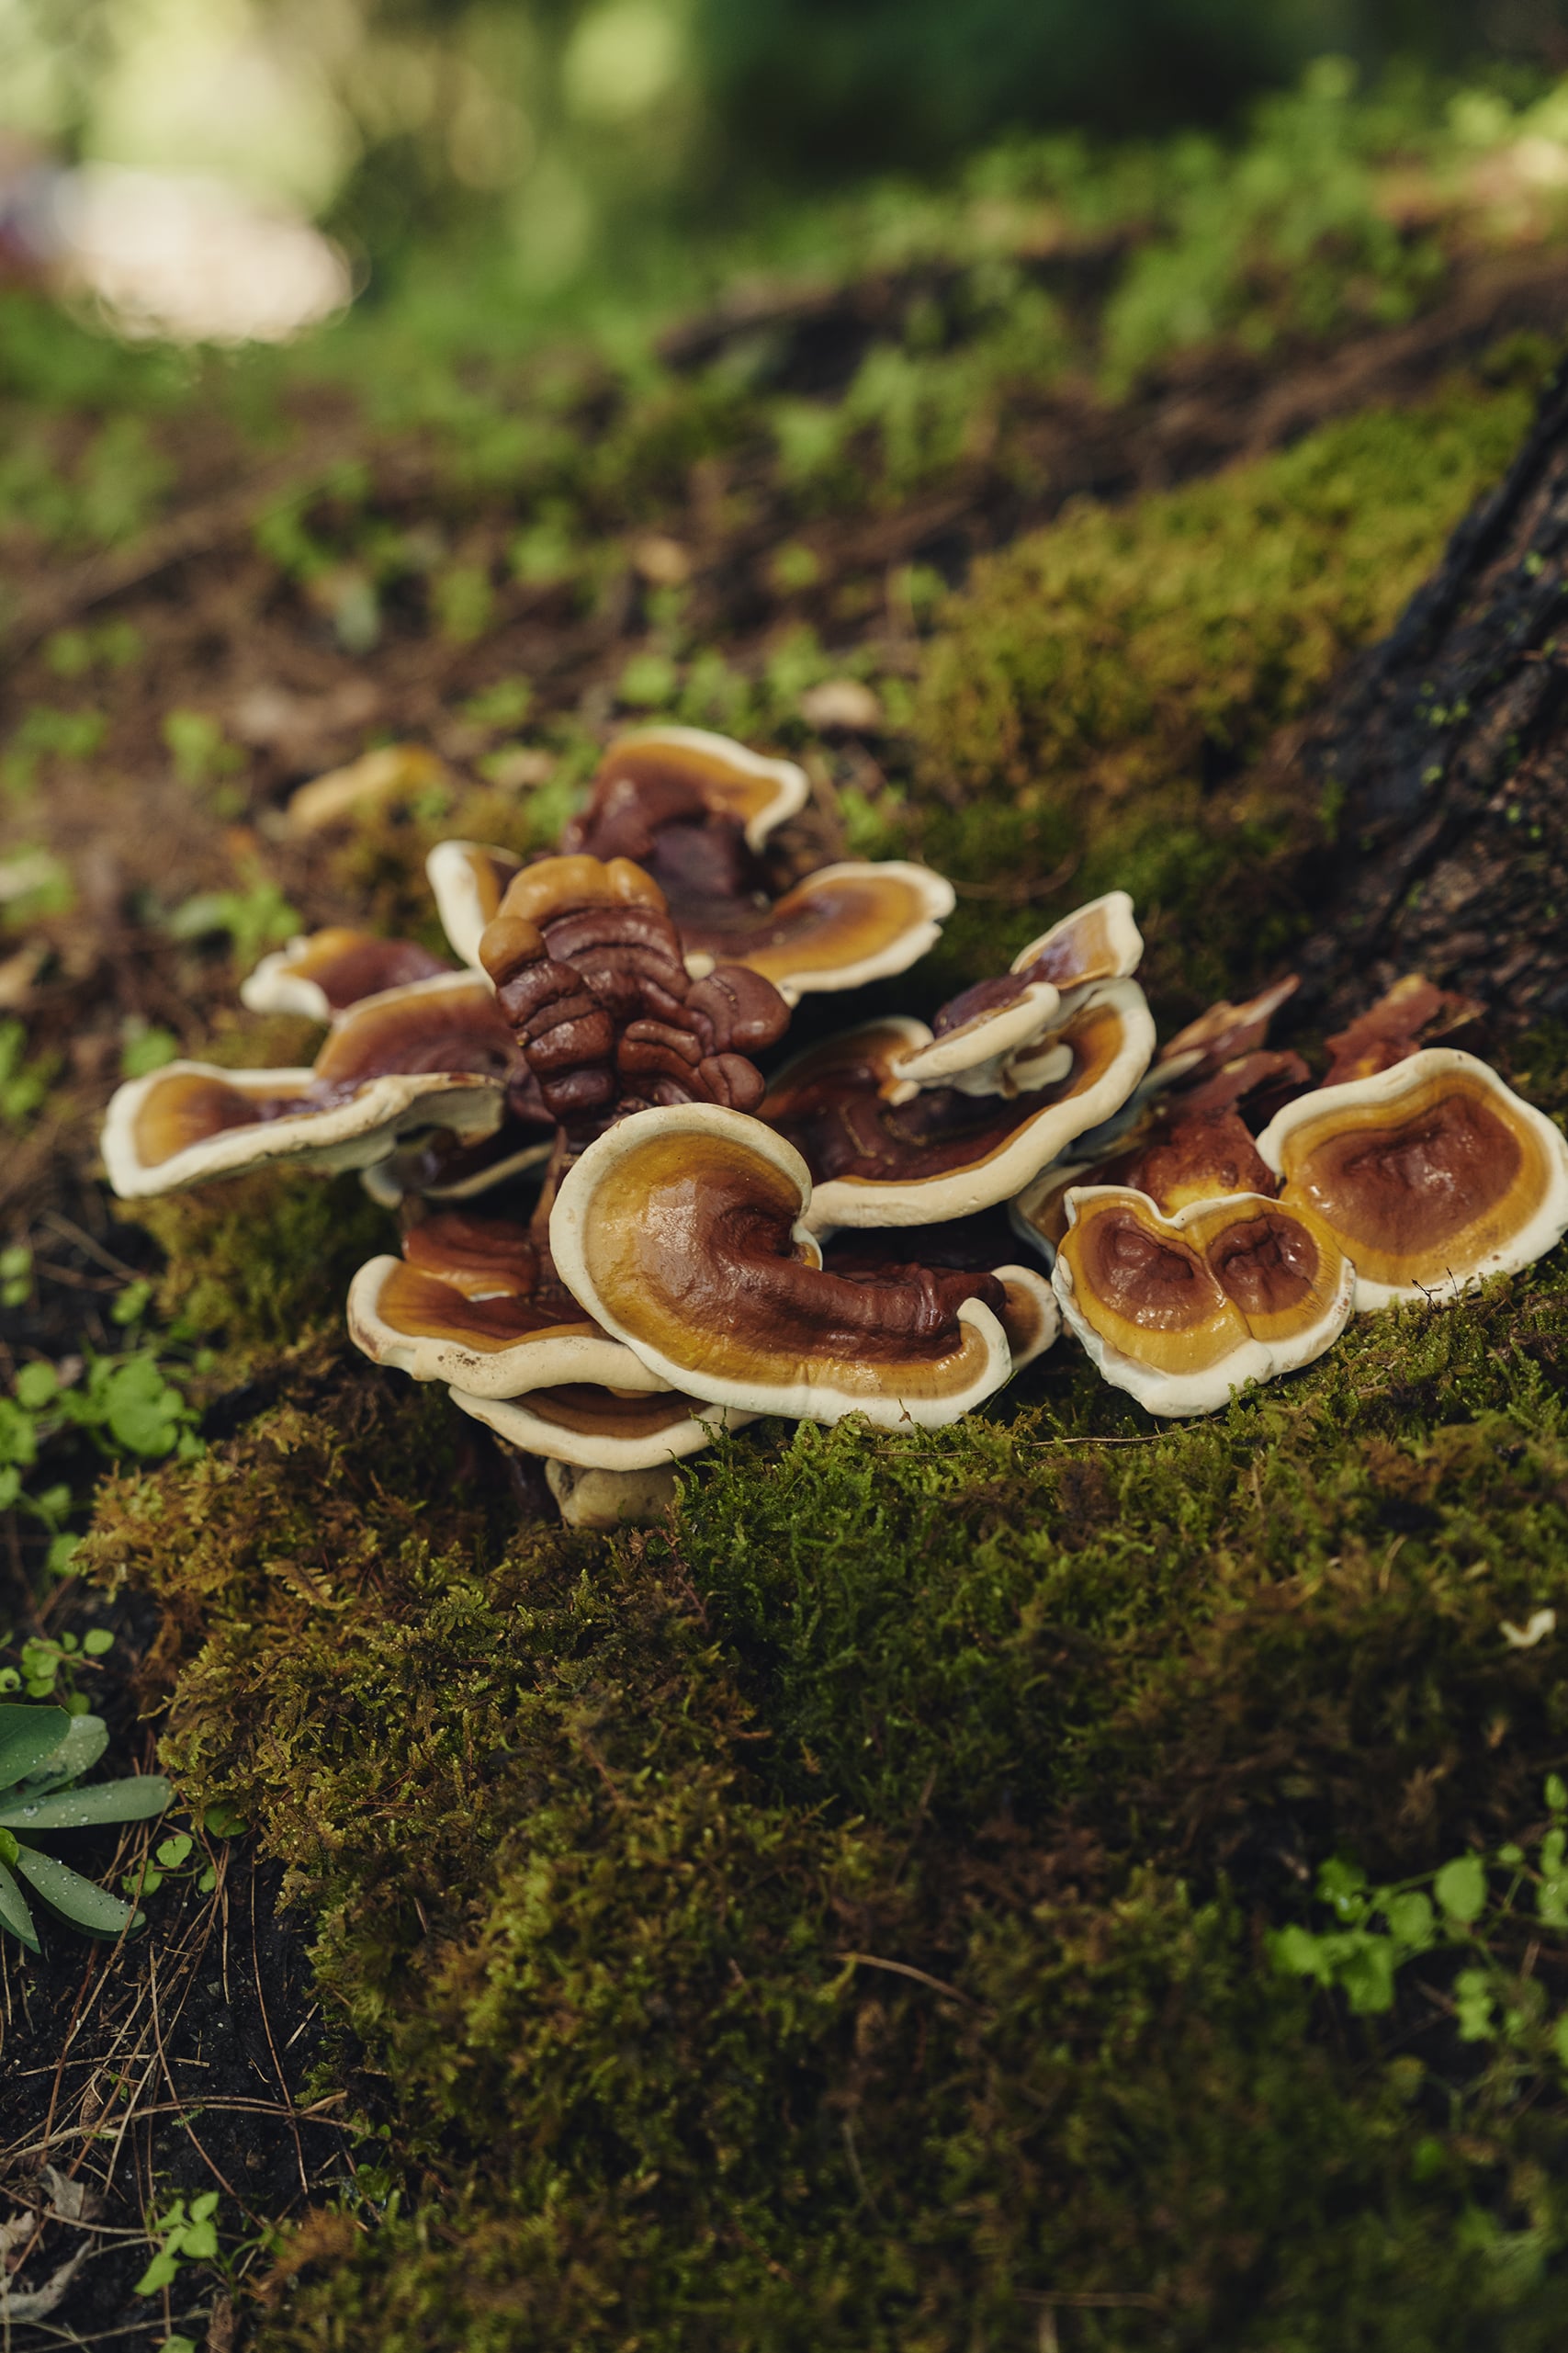 A herb for improving memory, reishi, growing on a log